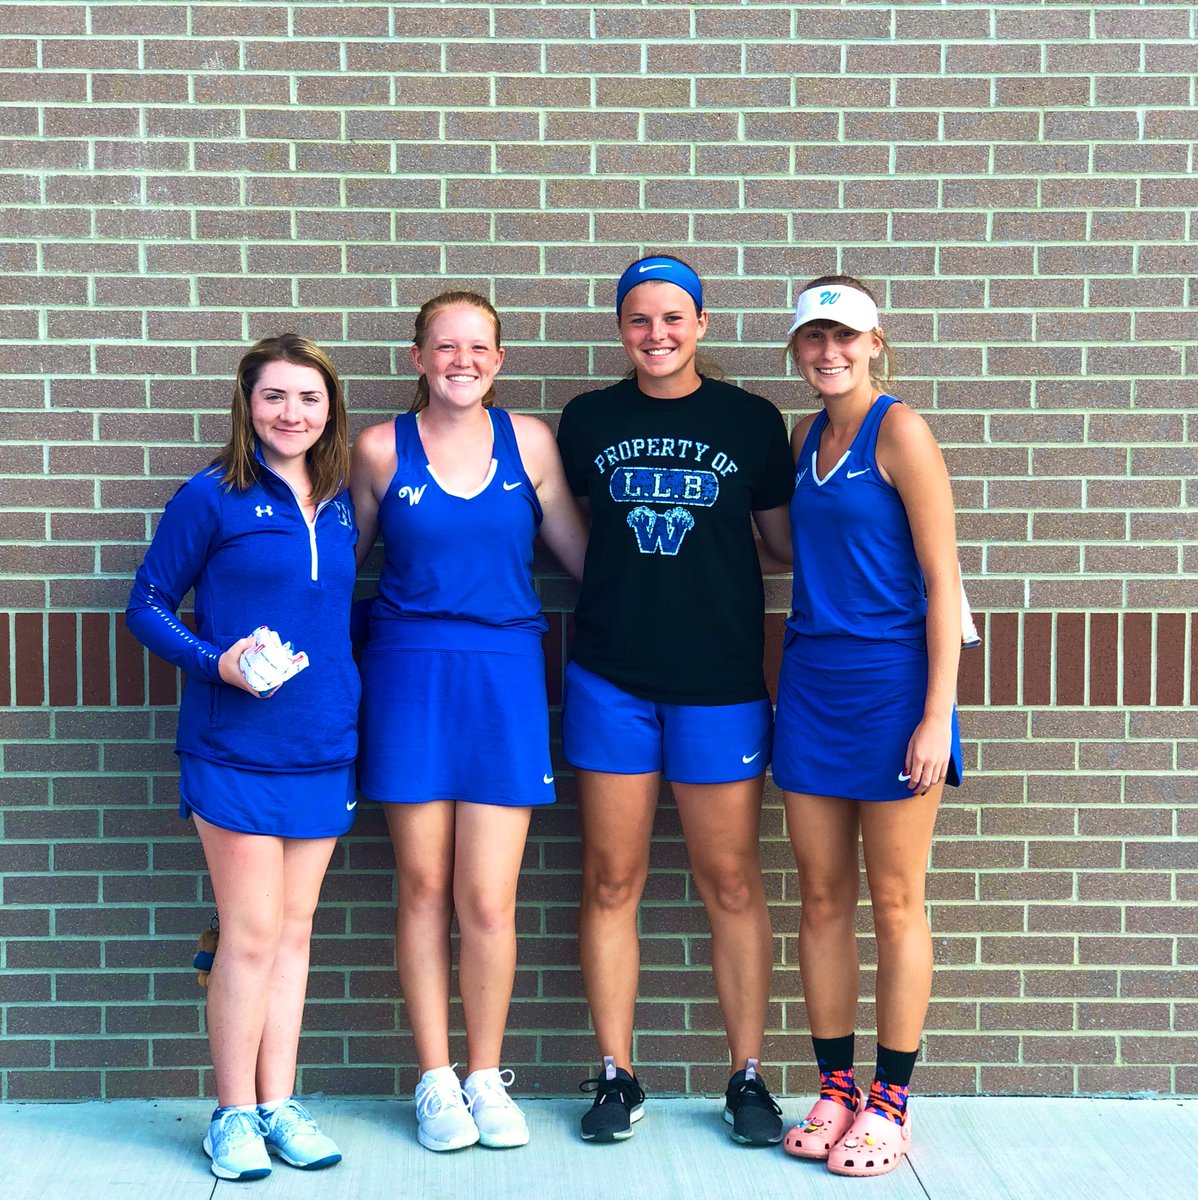 Very proud of the grit these four showed over the last two days! Several hours of tennis in 90 + degree weather! Way to represent @WCHCS Districts Here We Come! #DontLimitYourself 🎾